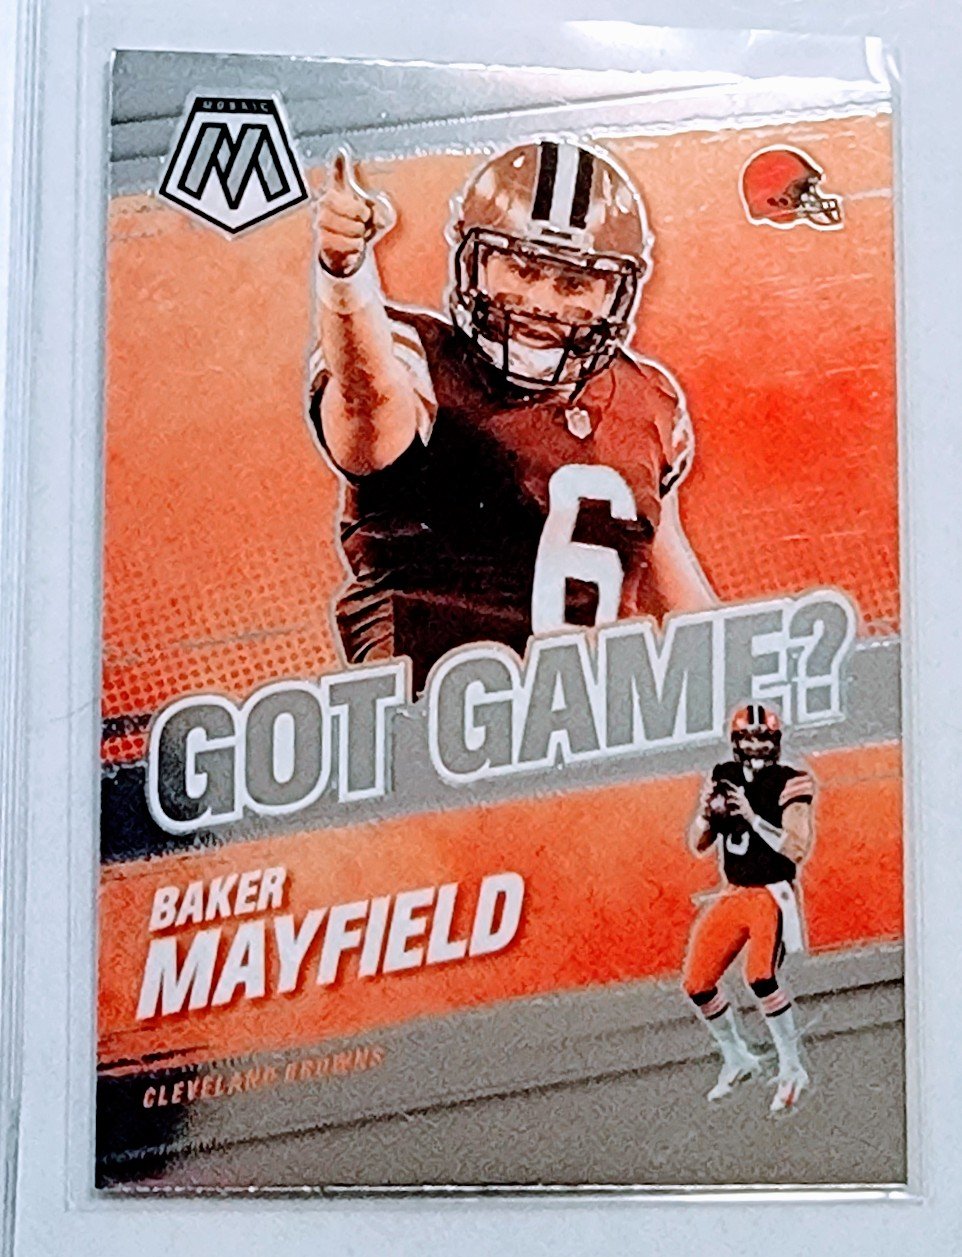 2021 Panini Mosaic Baker Mayfield Got Game Insert Football Card AVM1 simple Xclusive Collectibles   